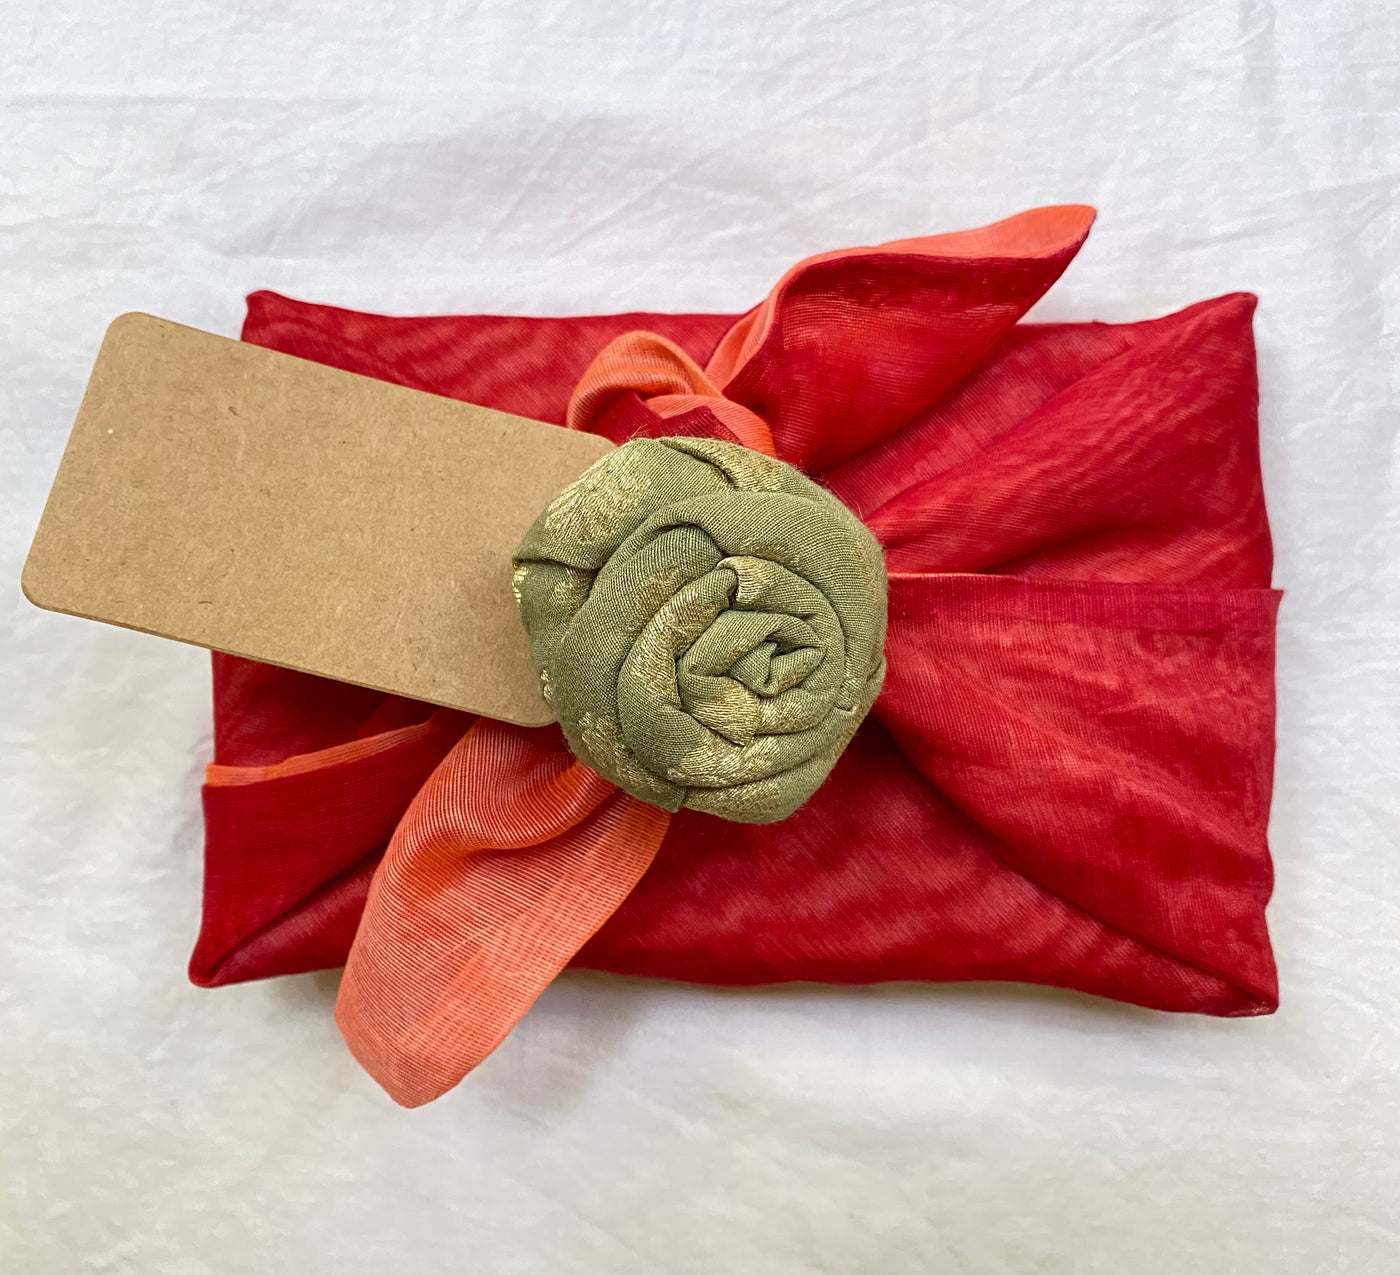 wrap comes along a cute brooch to garnish and a Kraft paper tag